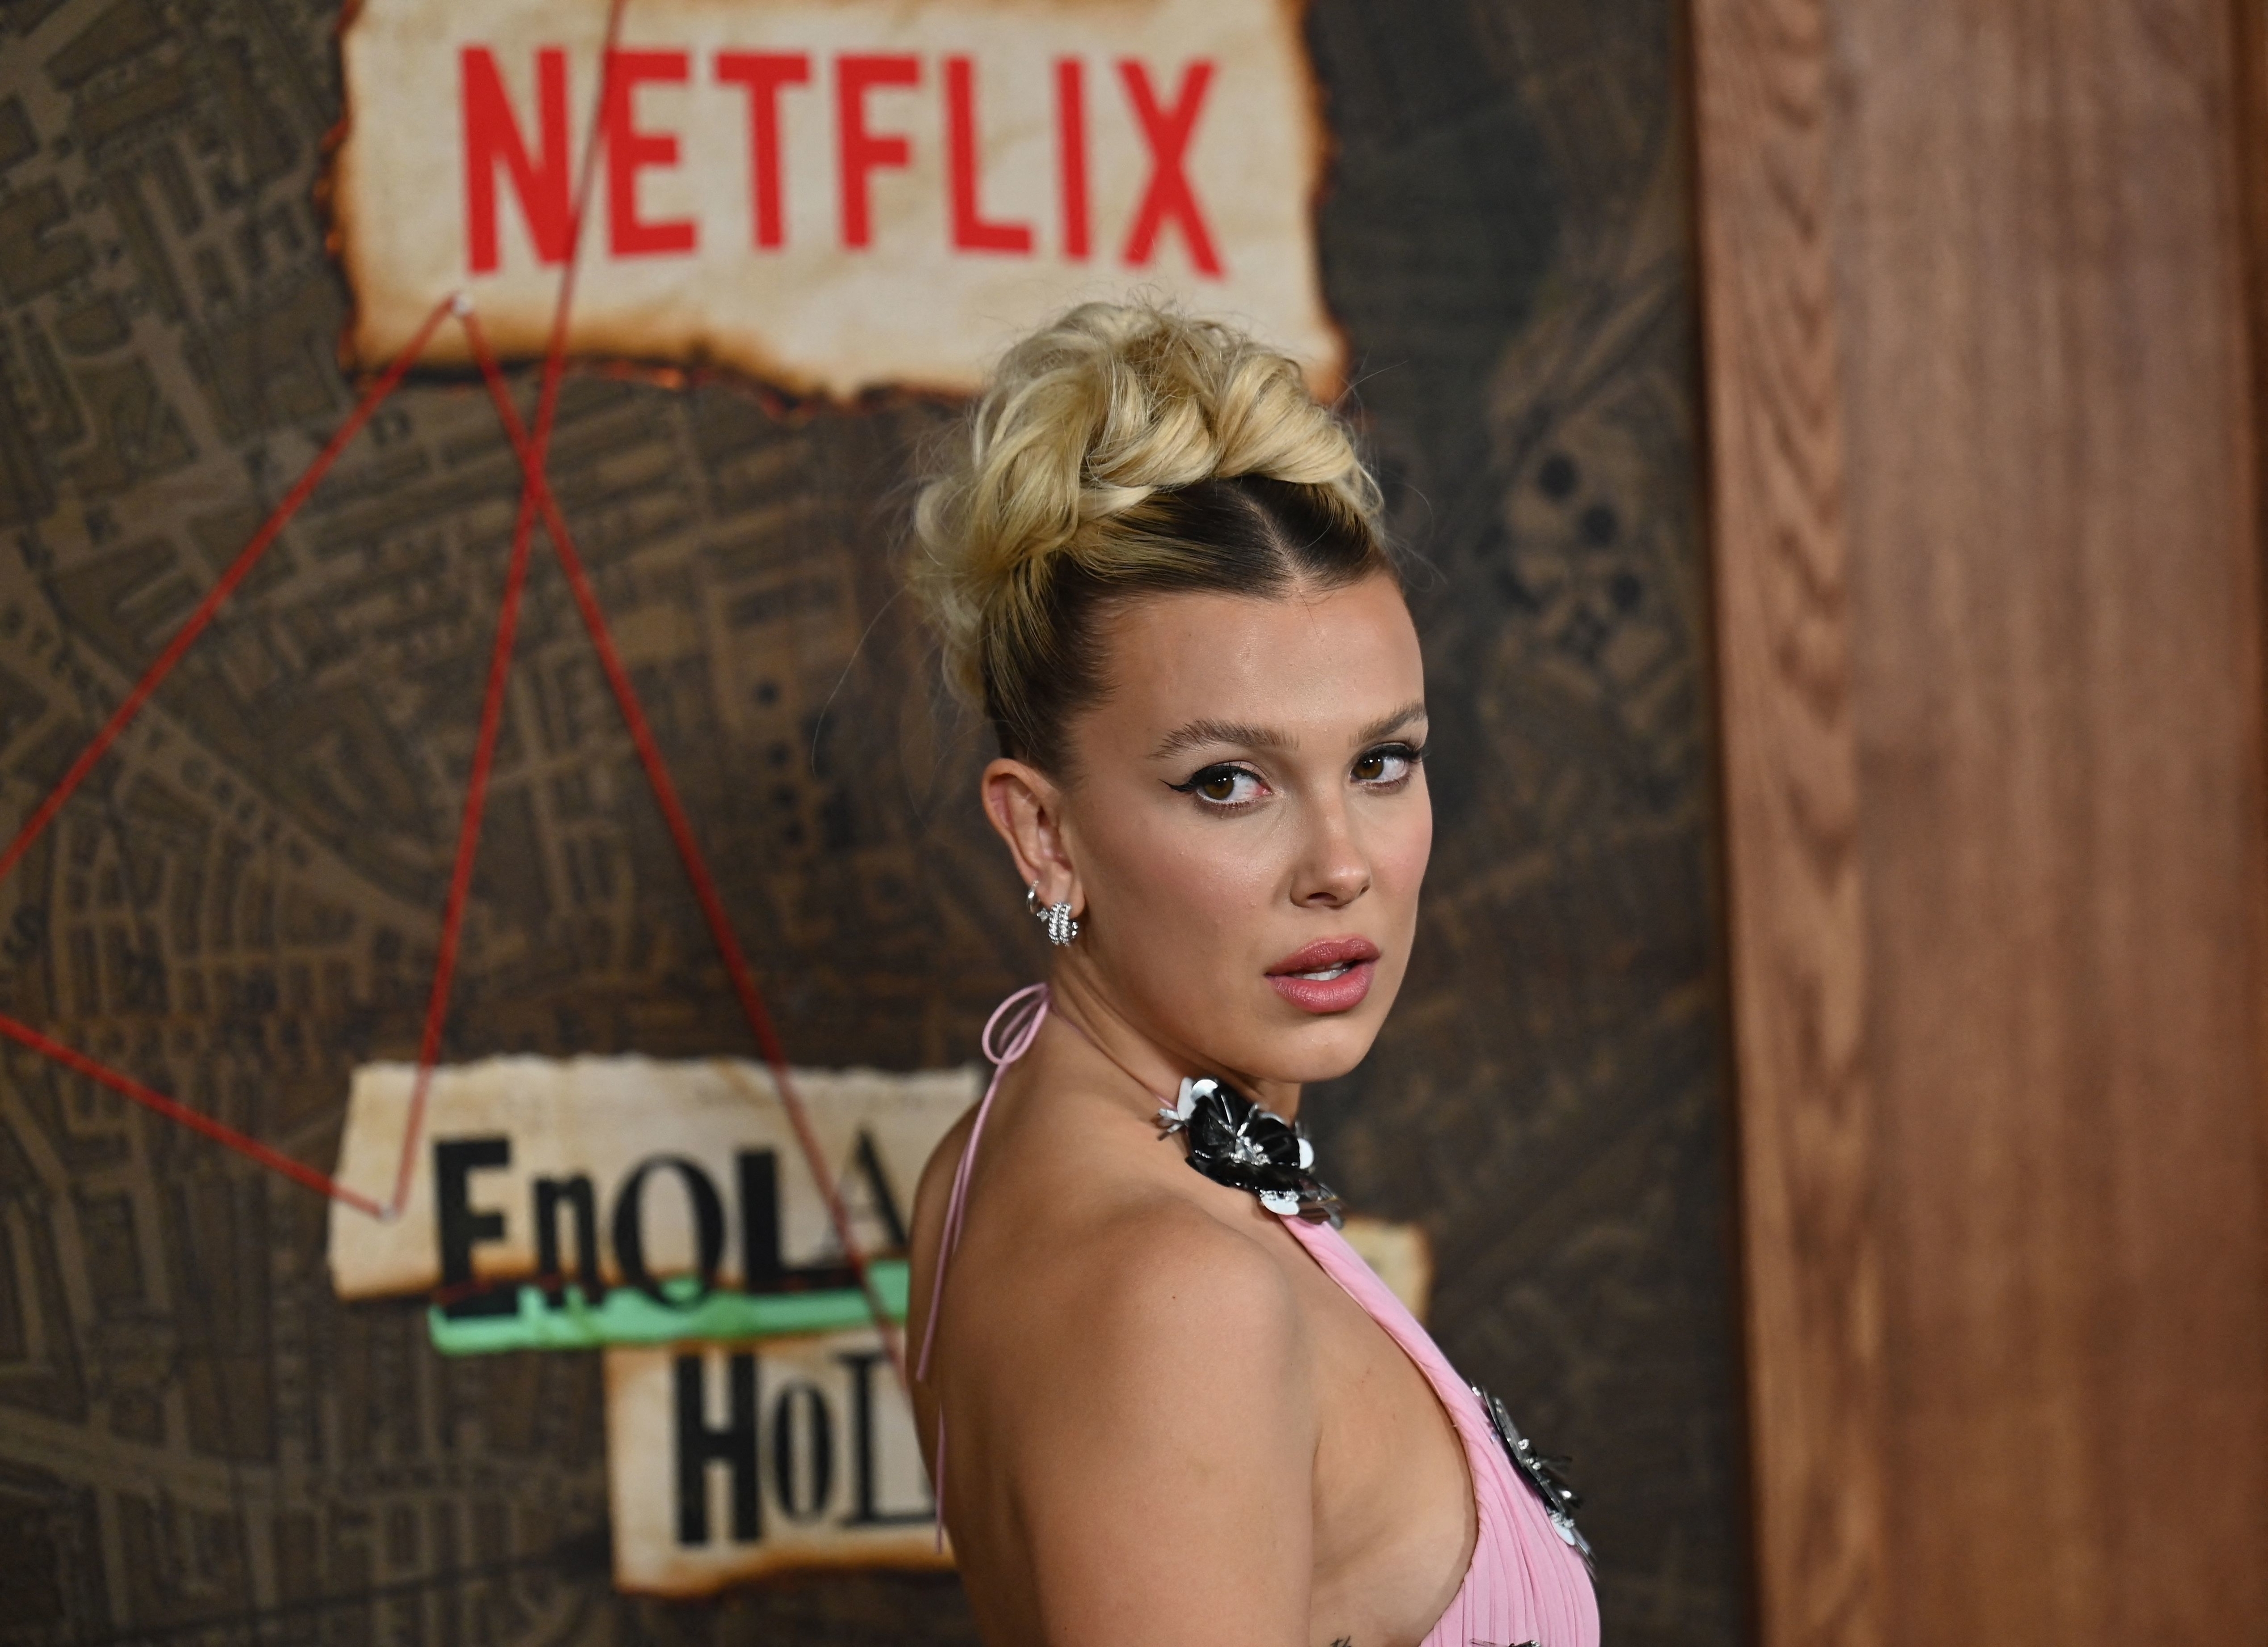 Millie in a dress and a statement necklace, with a bun hairstyle, on a red carpet with a Netflix logo background